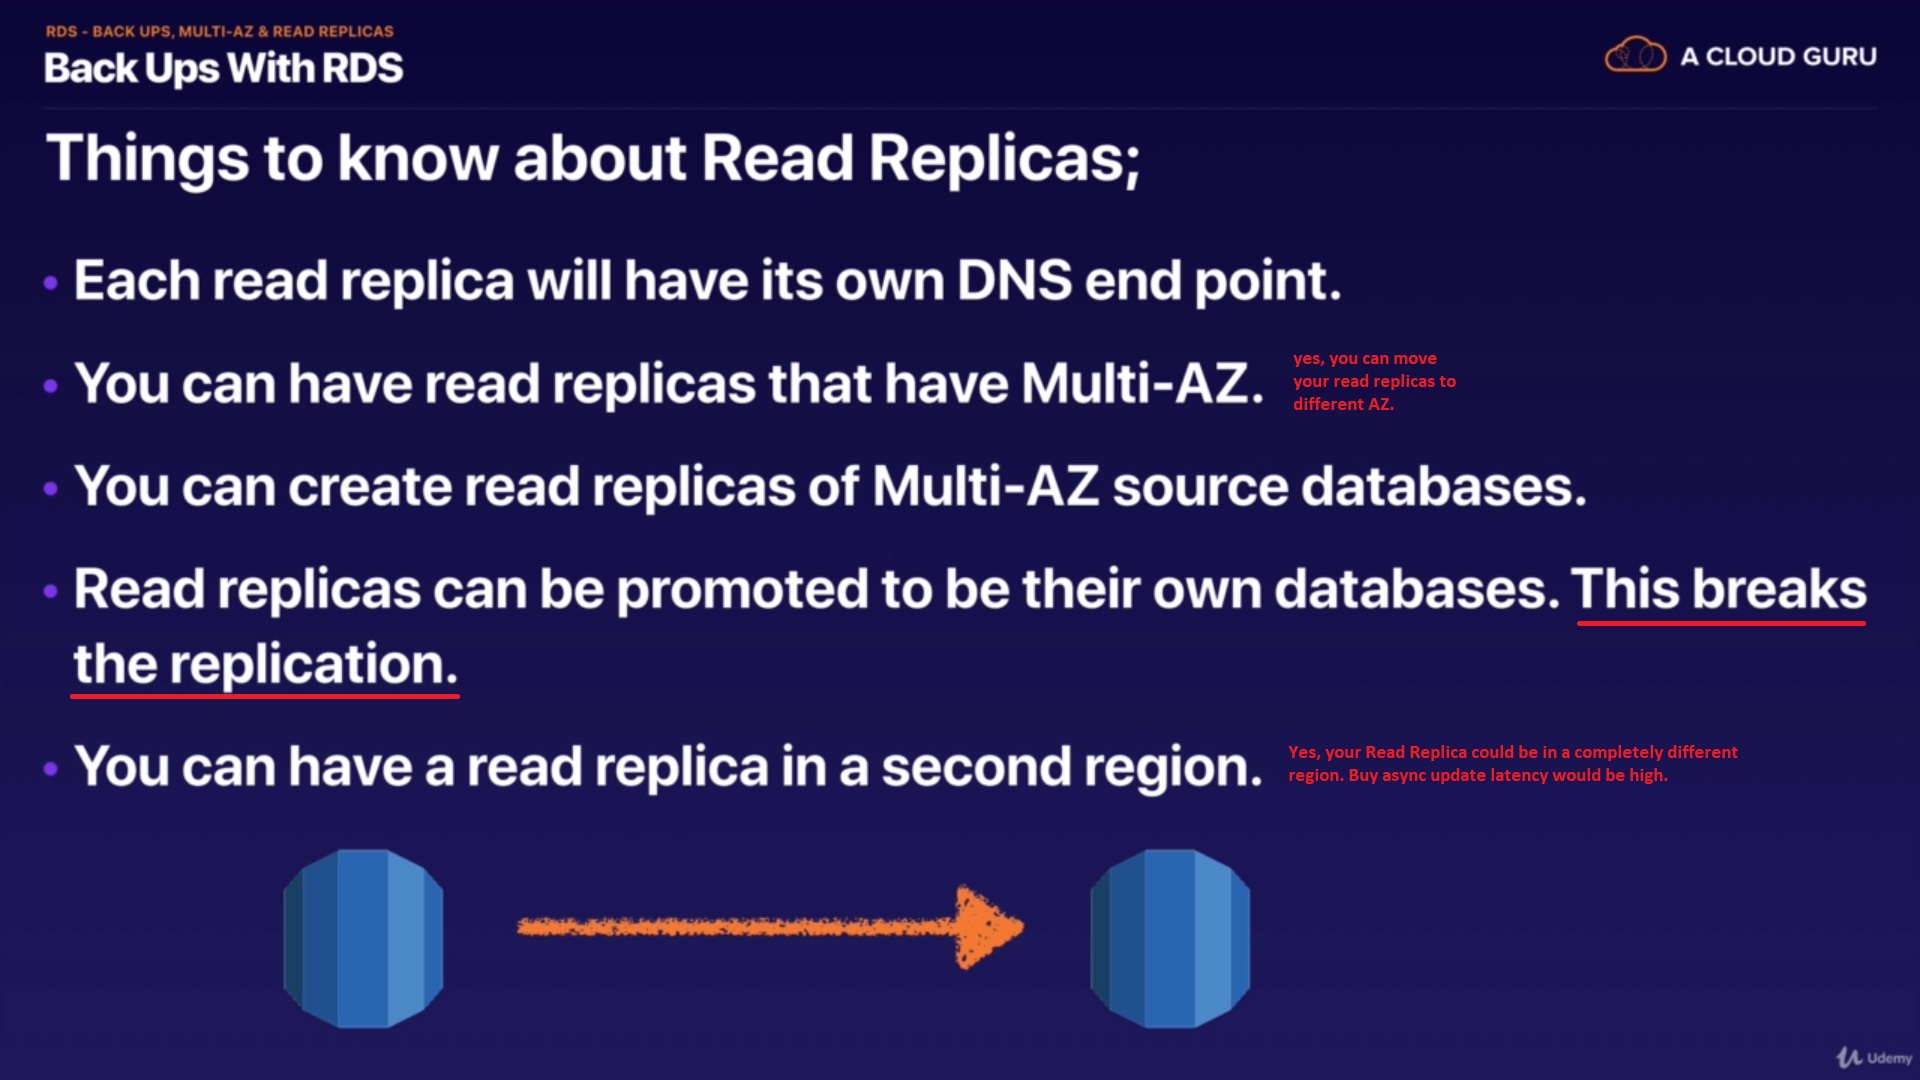 RDS_Backups and ReadReplica15